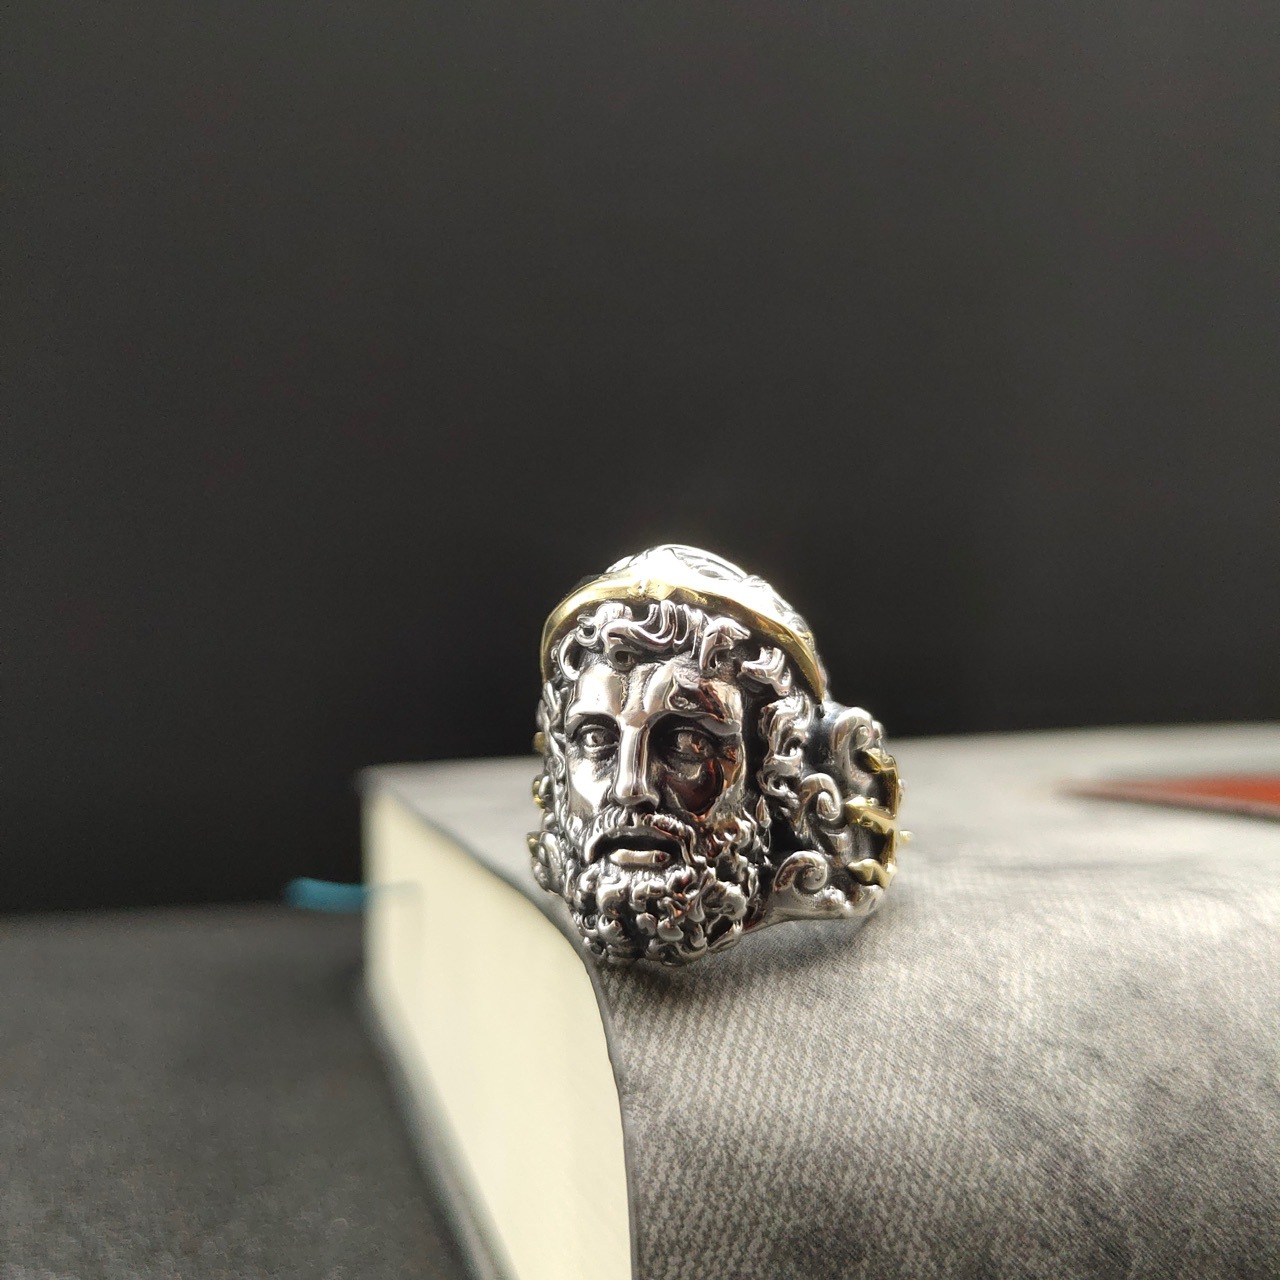 Ring Captured in Natural Light Highlighting the Silver Hue